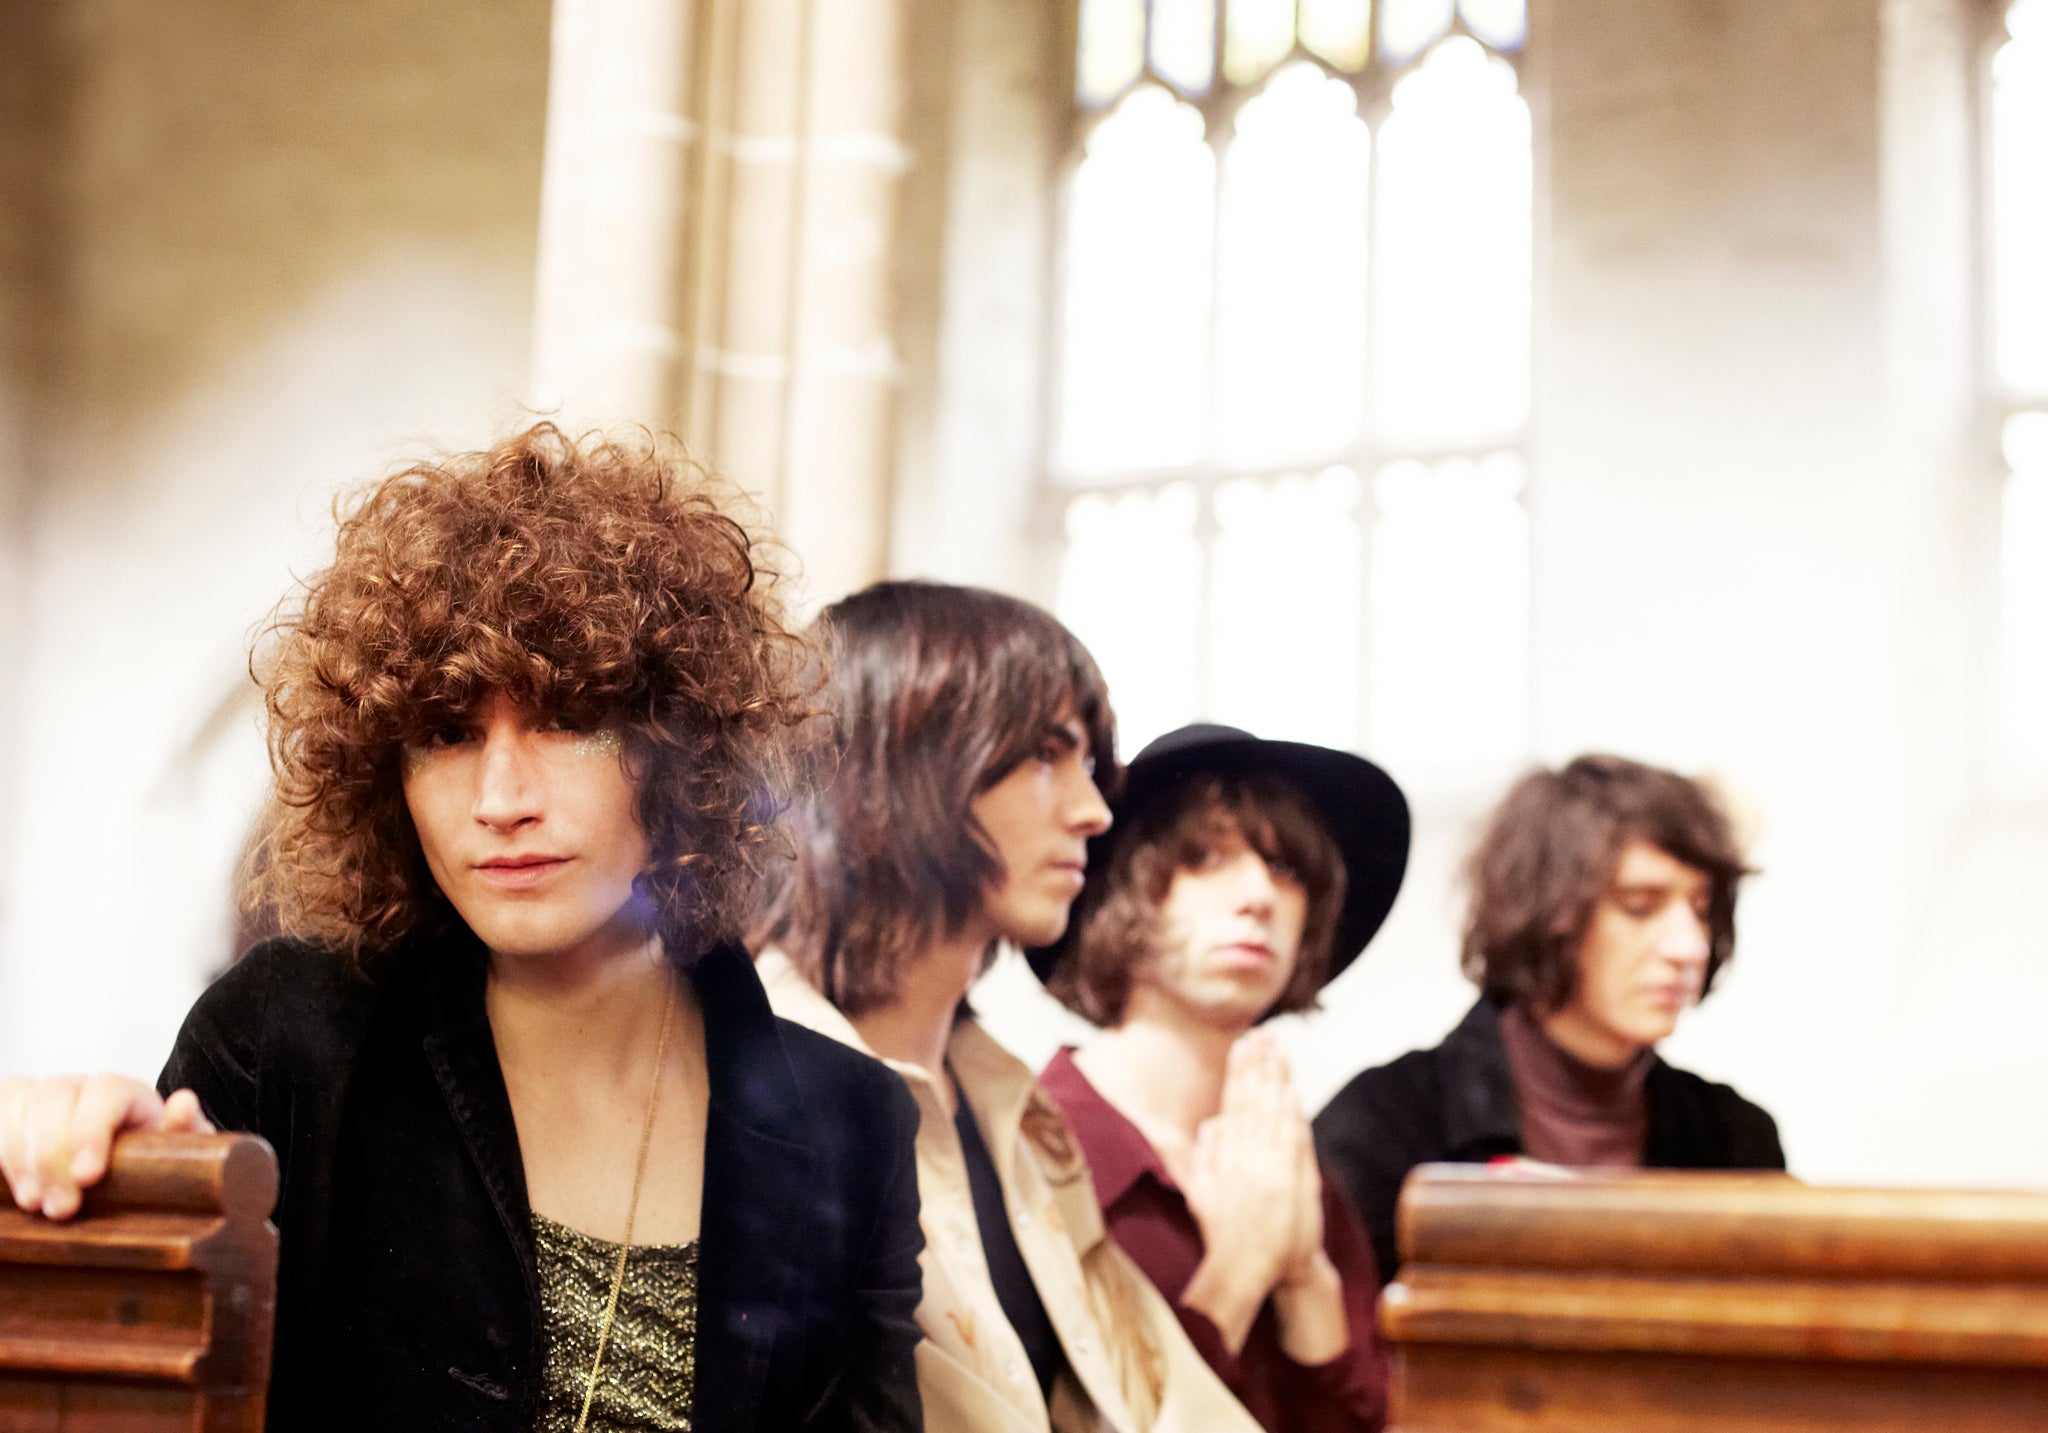 English psychedelic rock band Temples